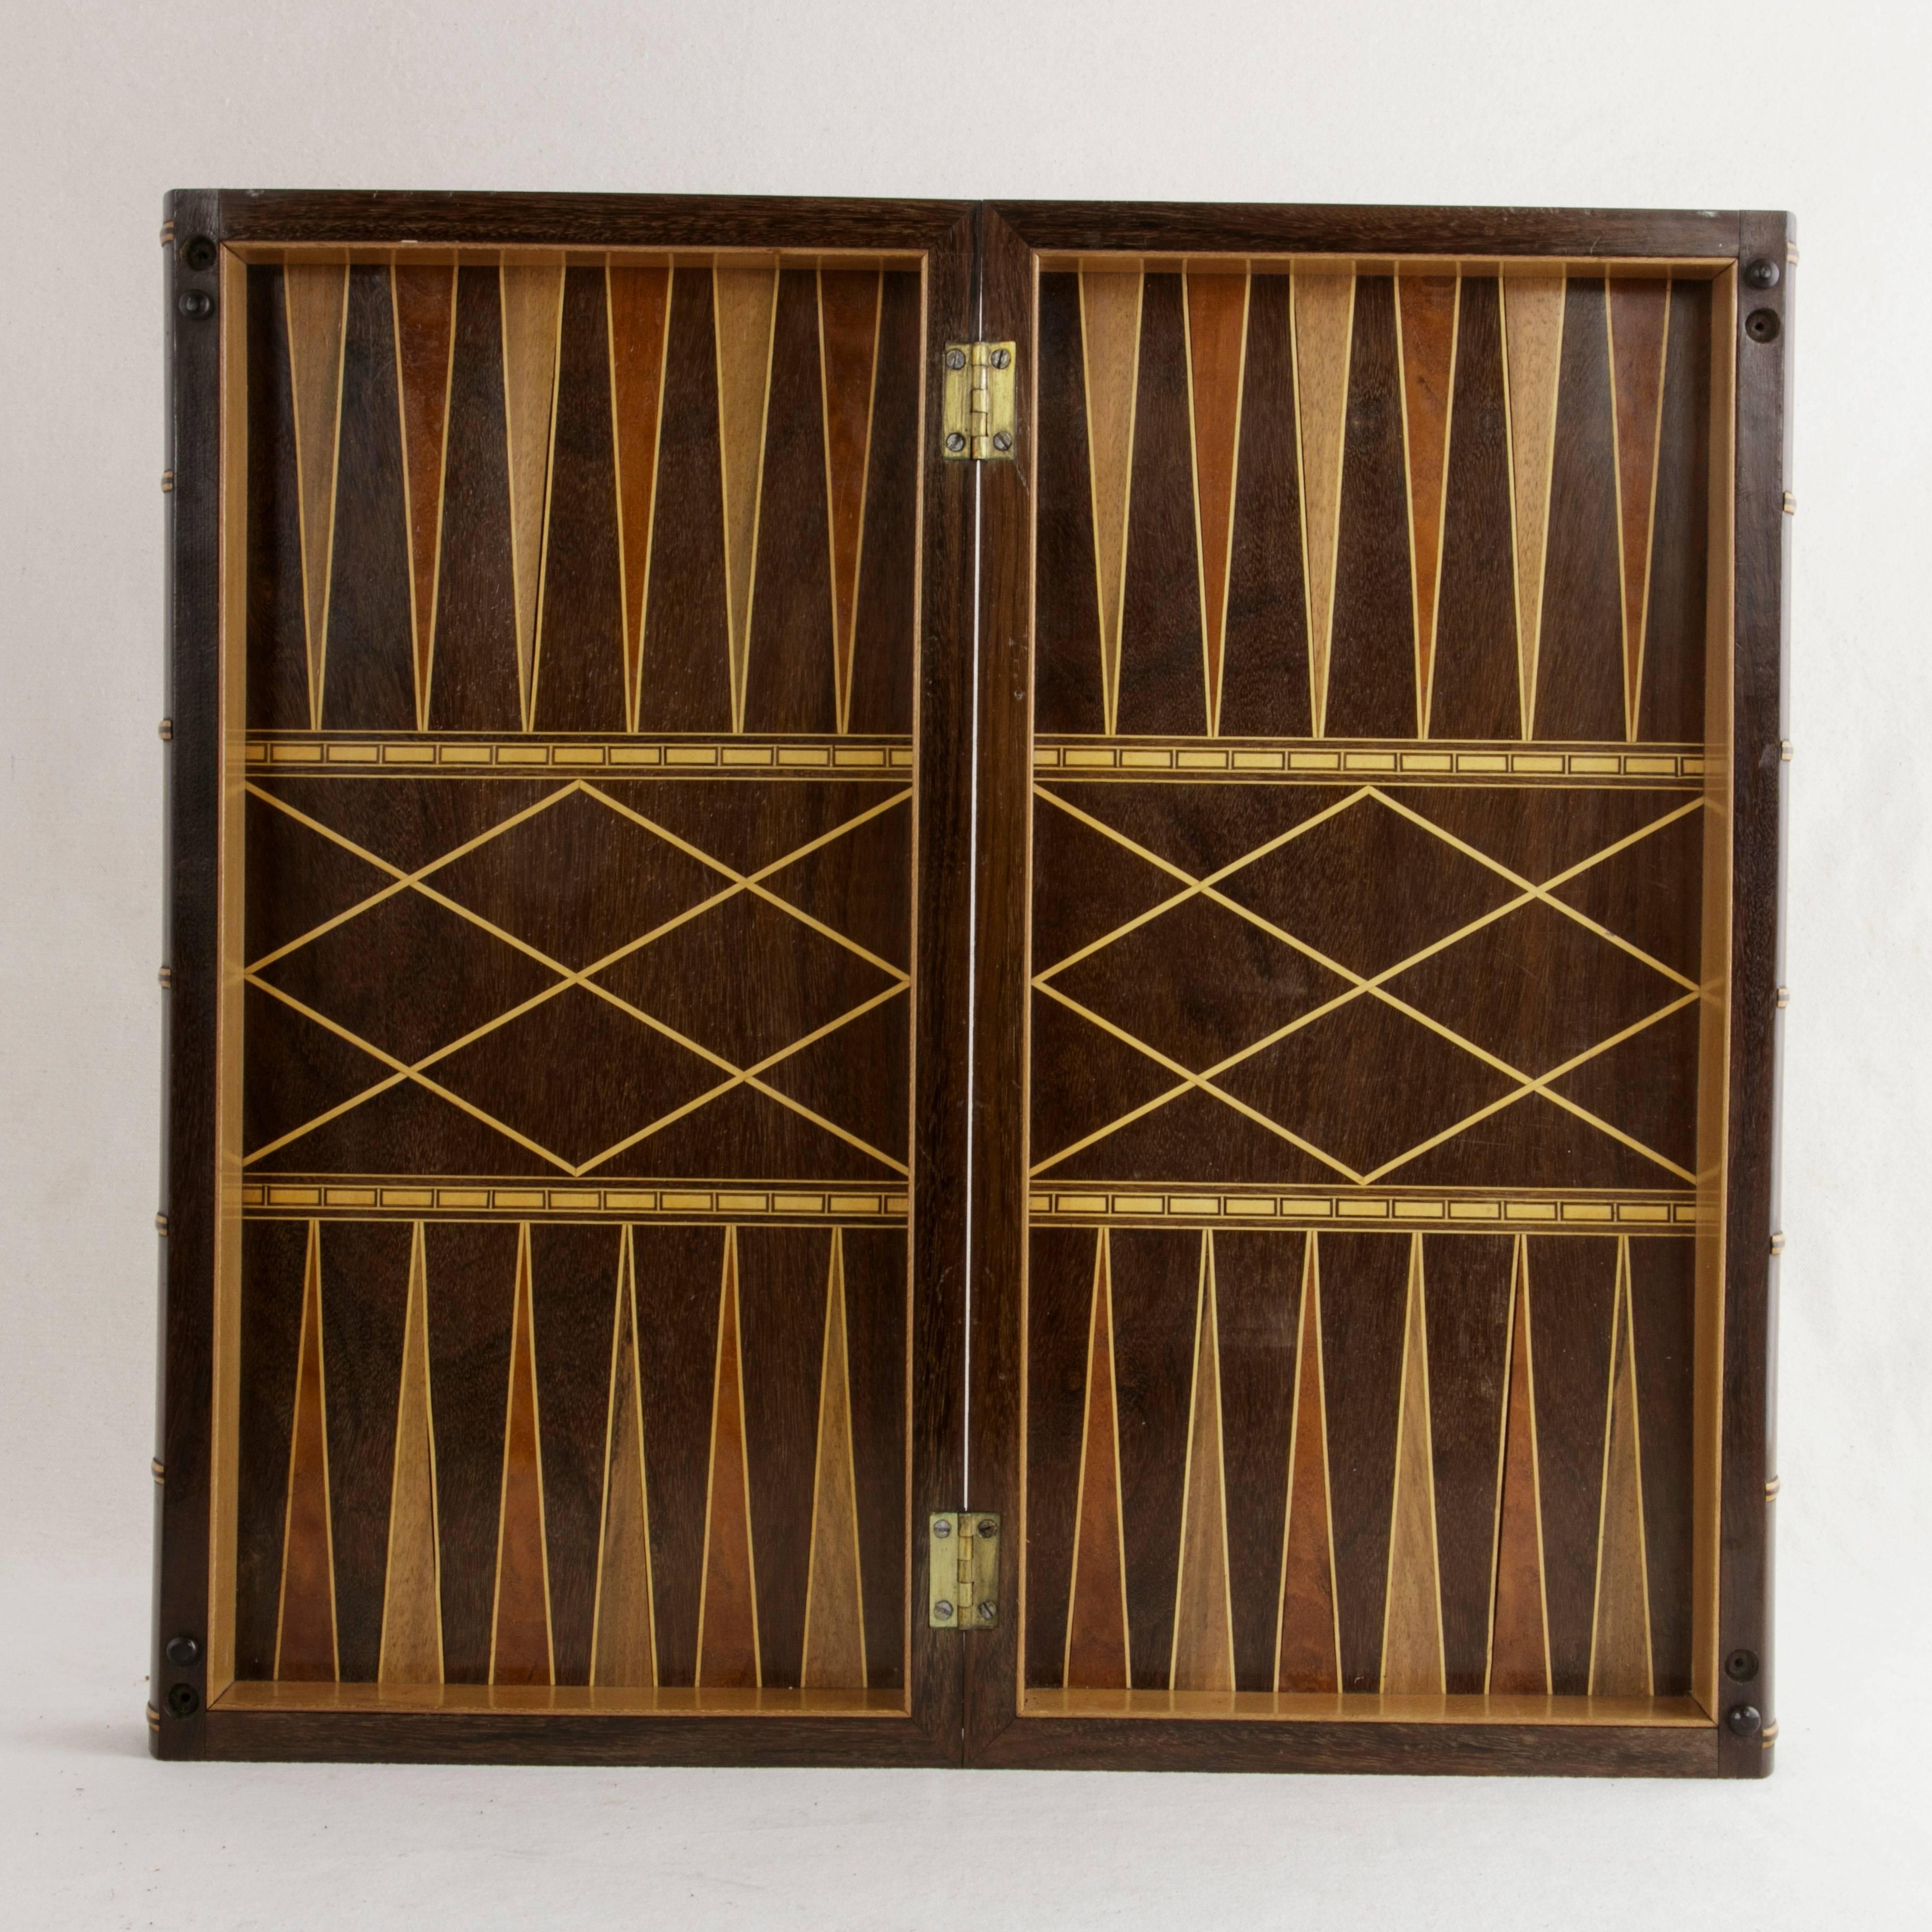 Hinged Marquetry Game Box for Chess, Checkers, Backgammon, Stacked Books Form 2